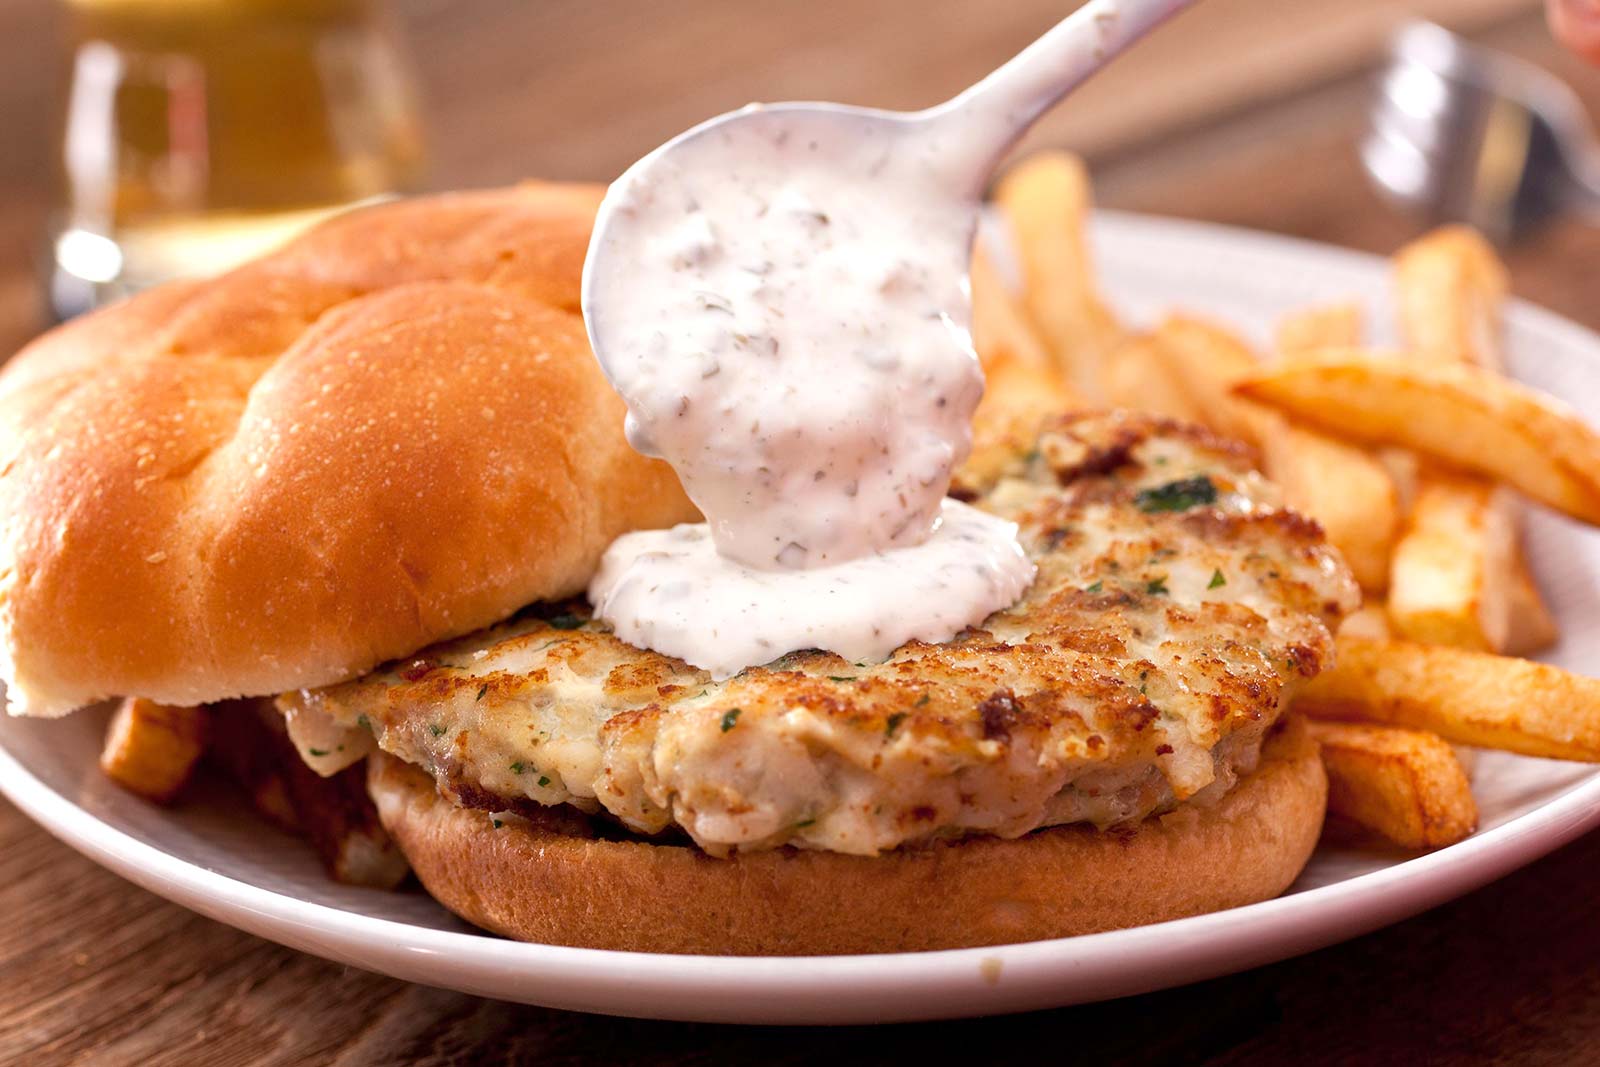 If You've Tried 18 of Condiments & Sauces, You're Real … Quiz Tartar sauce